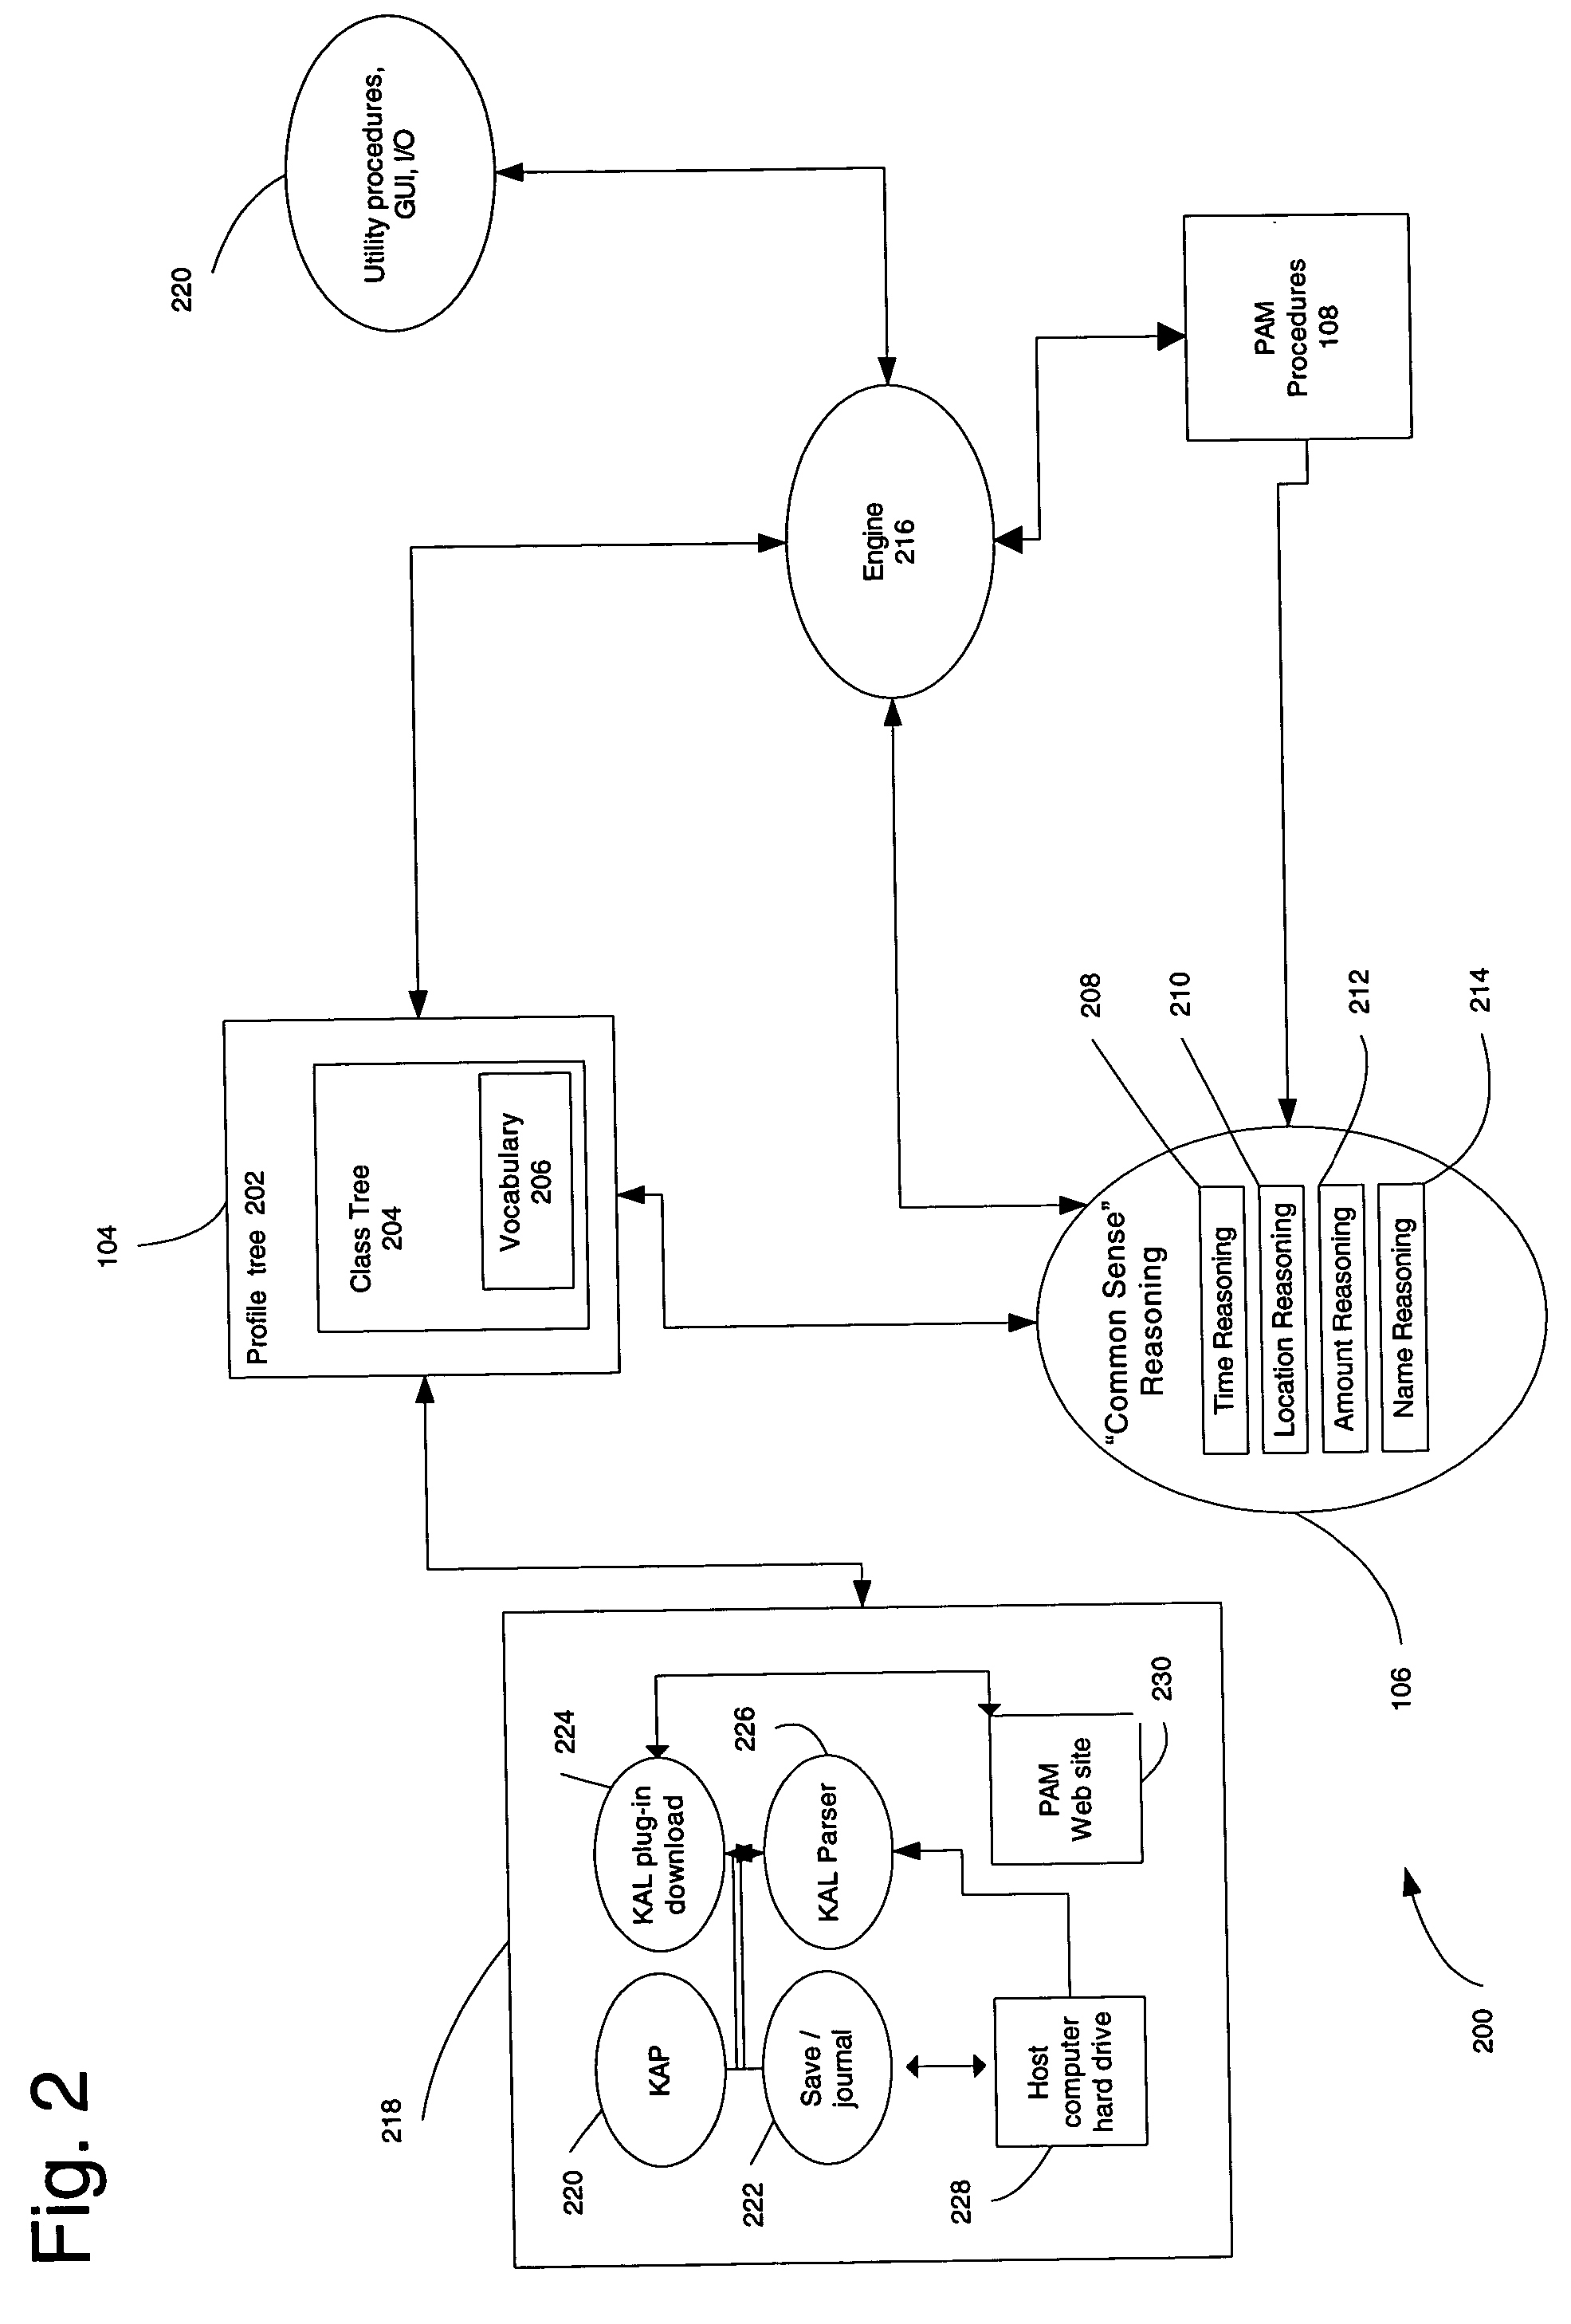 Method, system, and computer program product for storing, managing and using knowledge expressible as, and organized in accordance with, a natural language